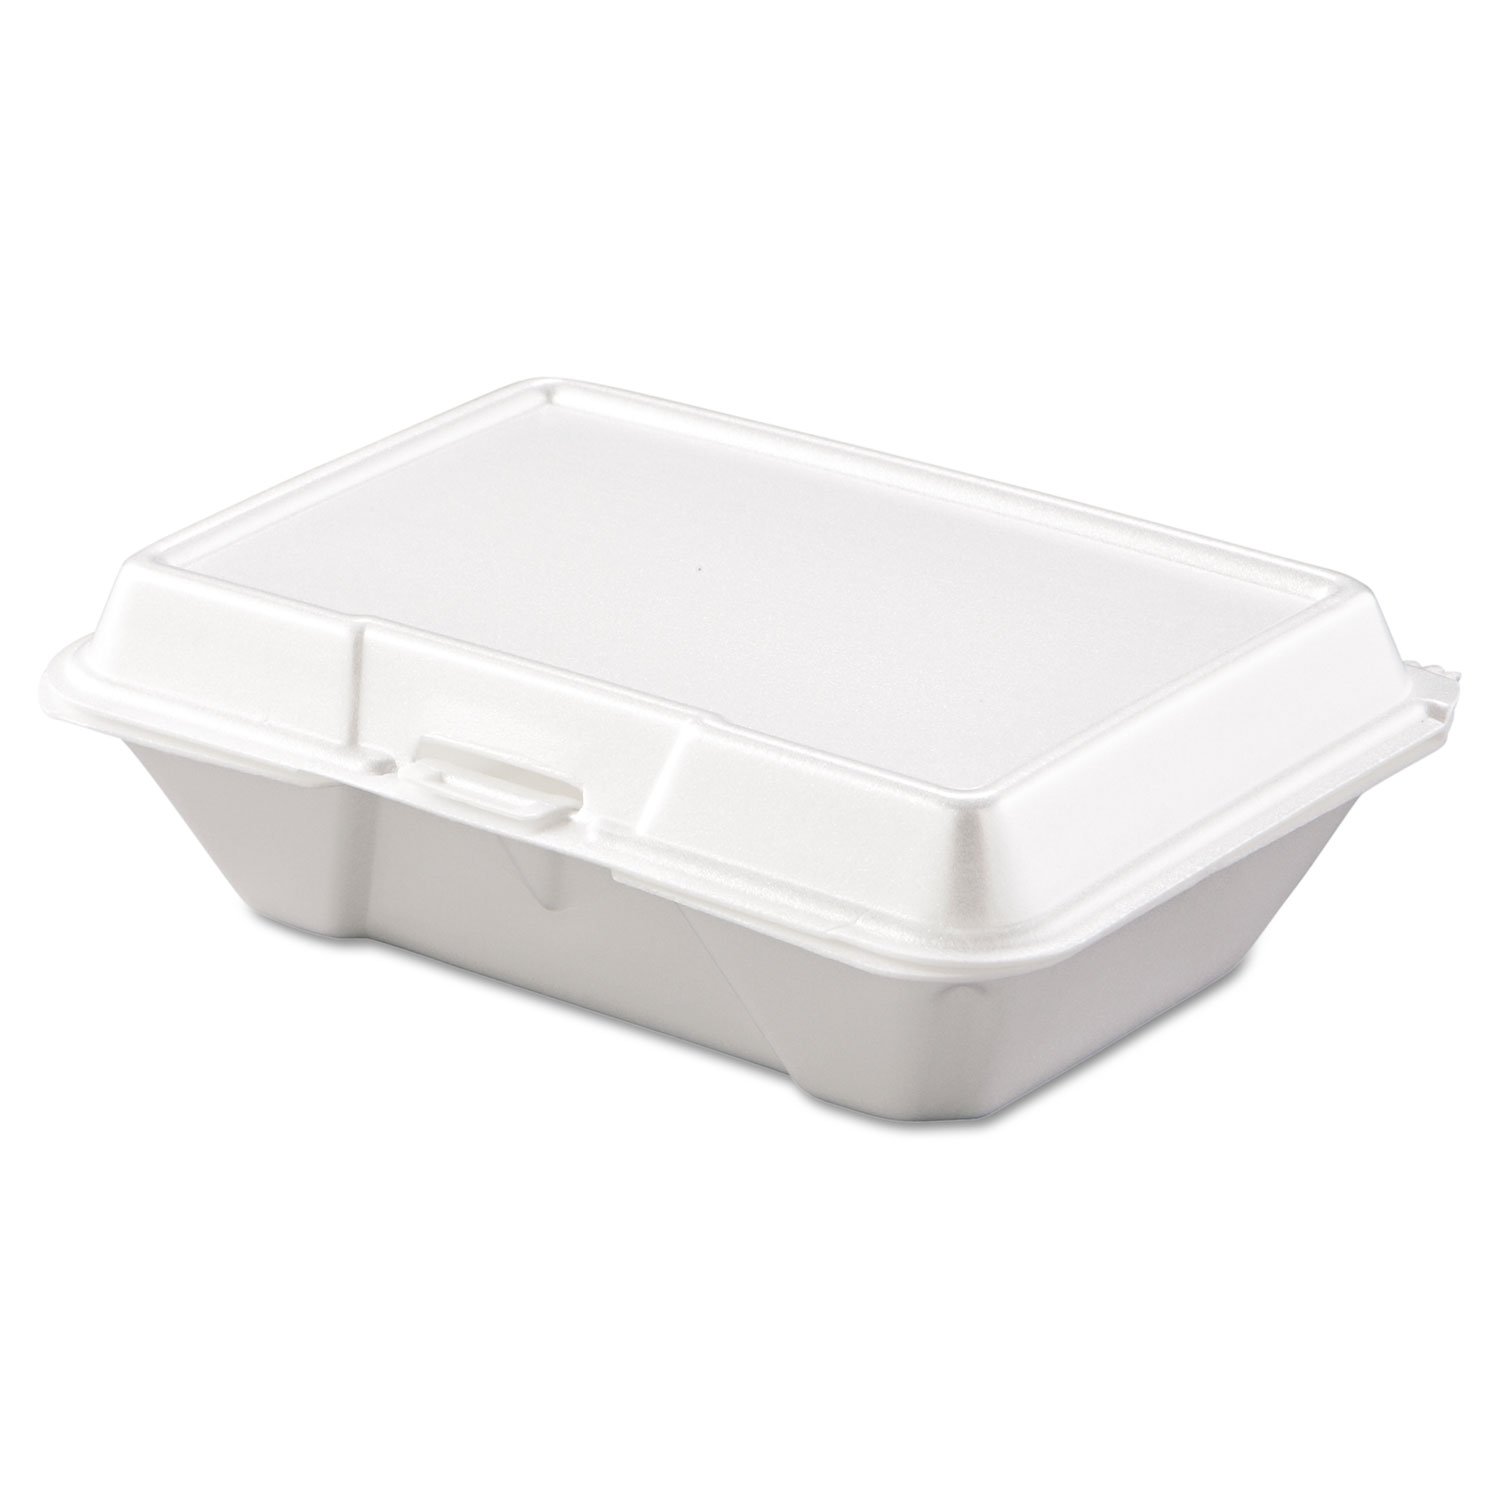 DCC205HT1 - Foam Hinged Lid Carryout Containers